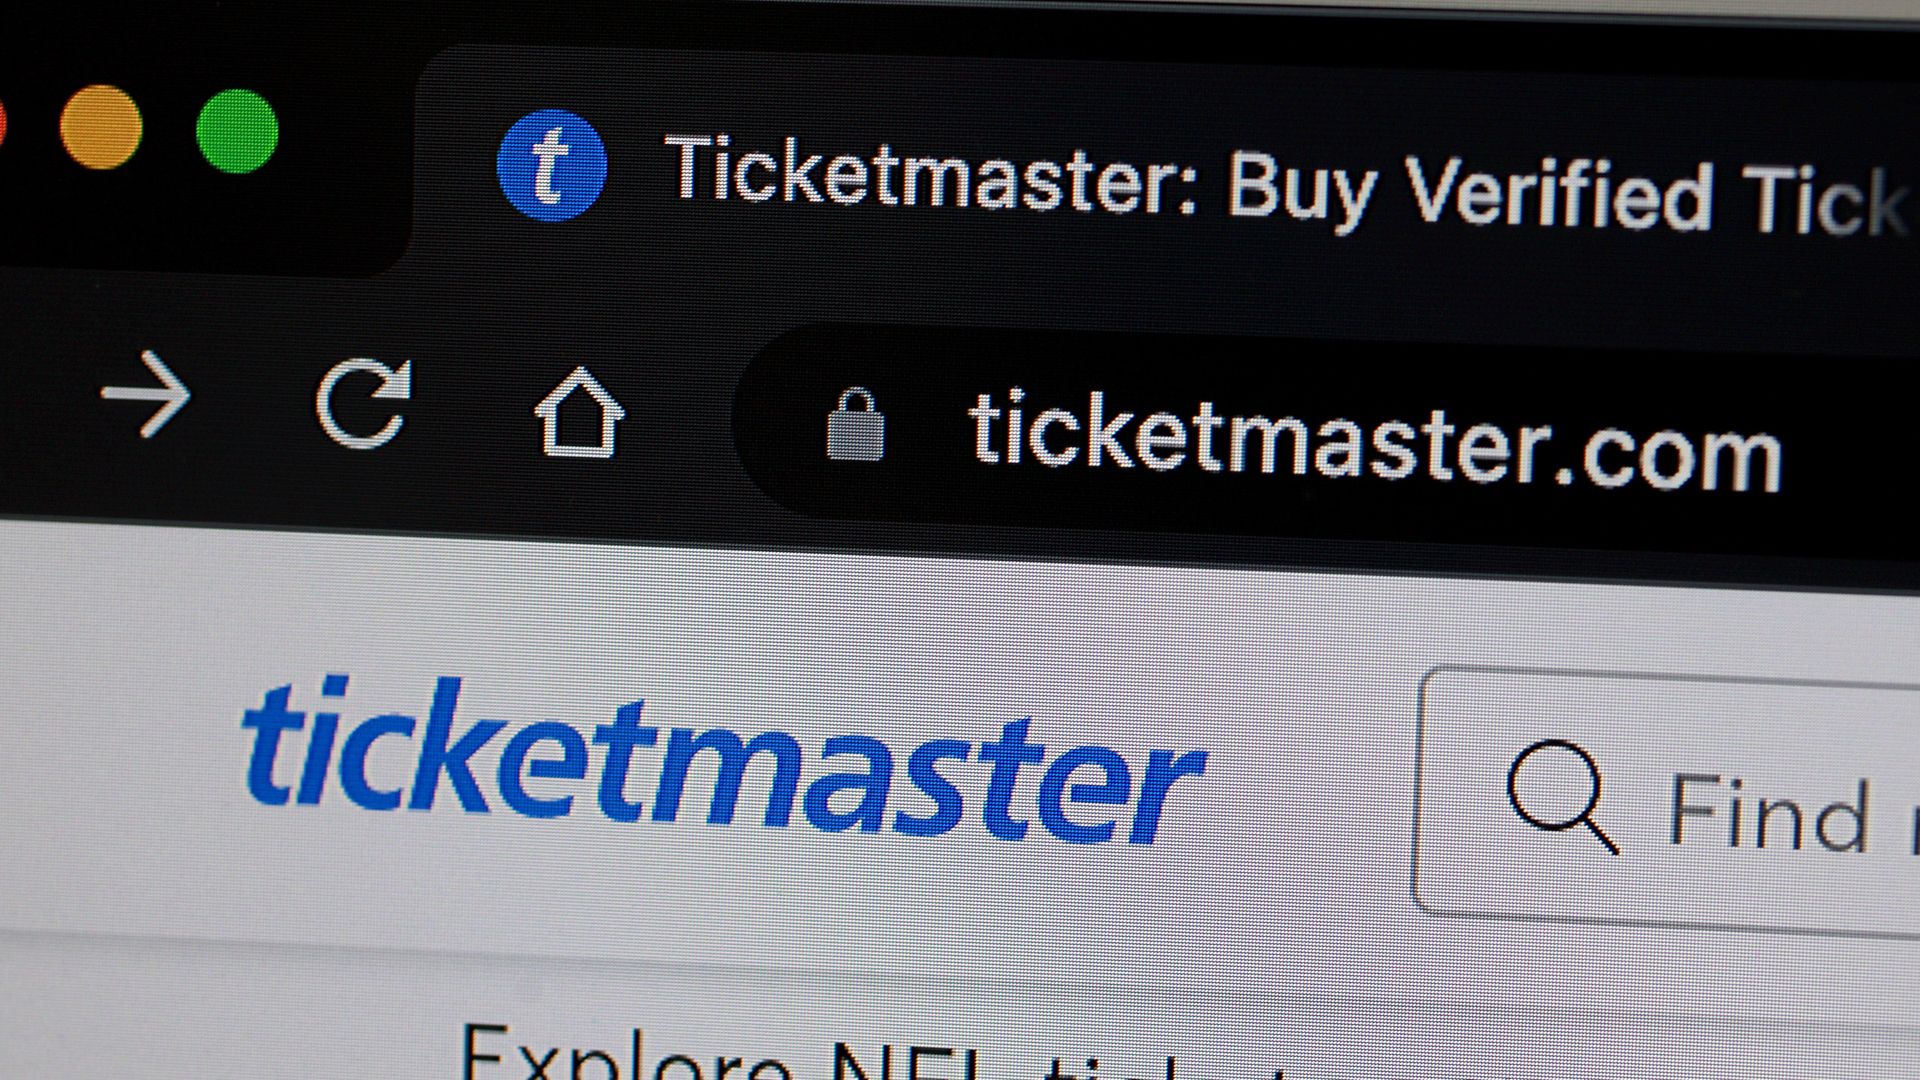 Live Nation's Ticketmaster faces scrutiny as fans of Taylor Swift and others voice frustration over hurdles encountered when trying to buy tickets.